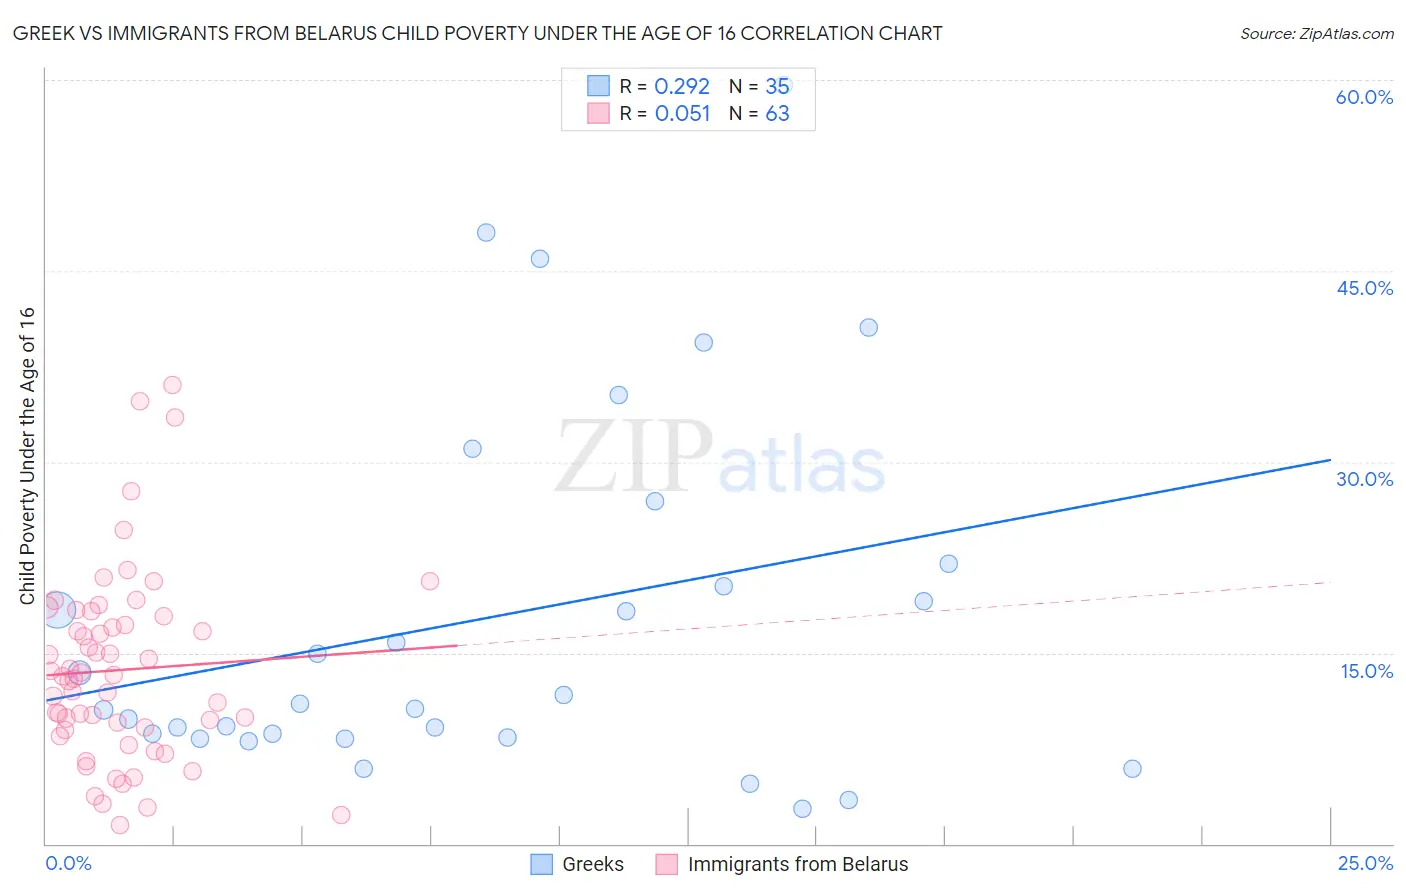 Greek vs Immigrants from Belarus Child Poverty Under the Age of 16